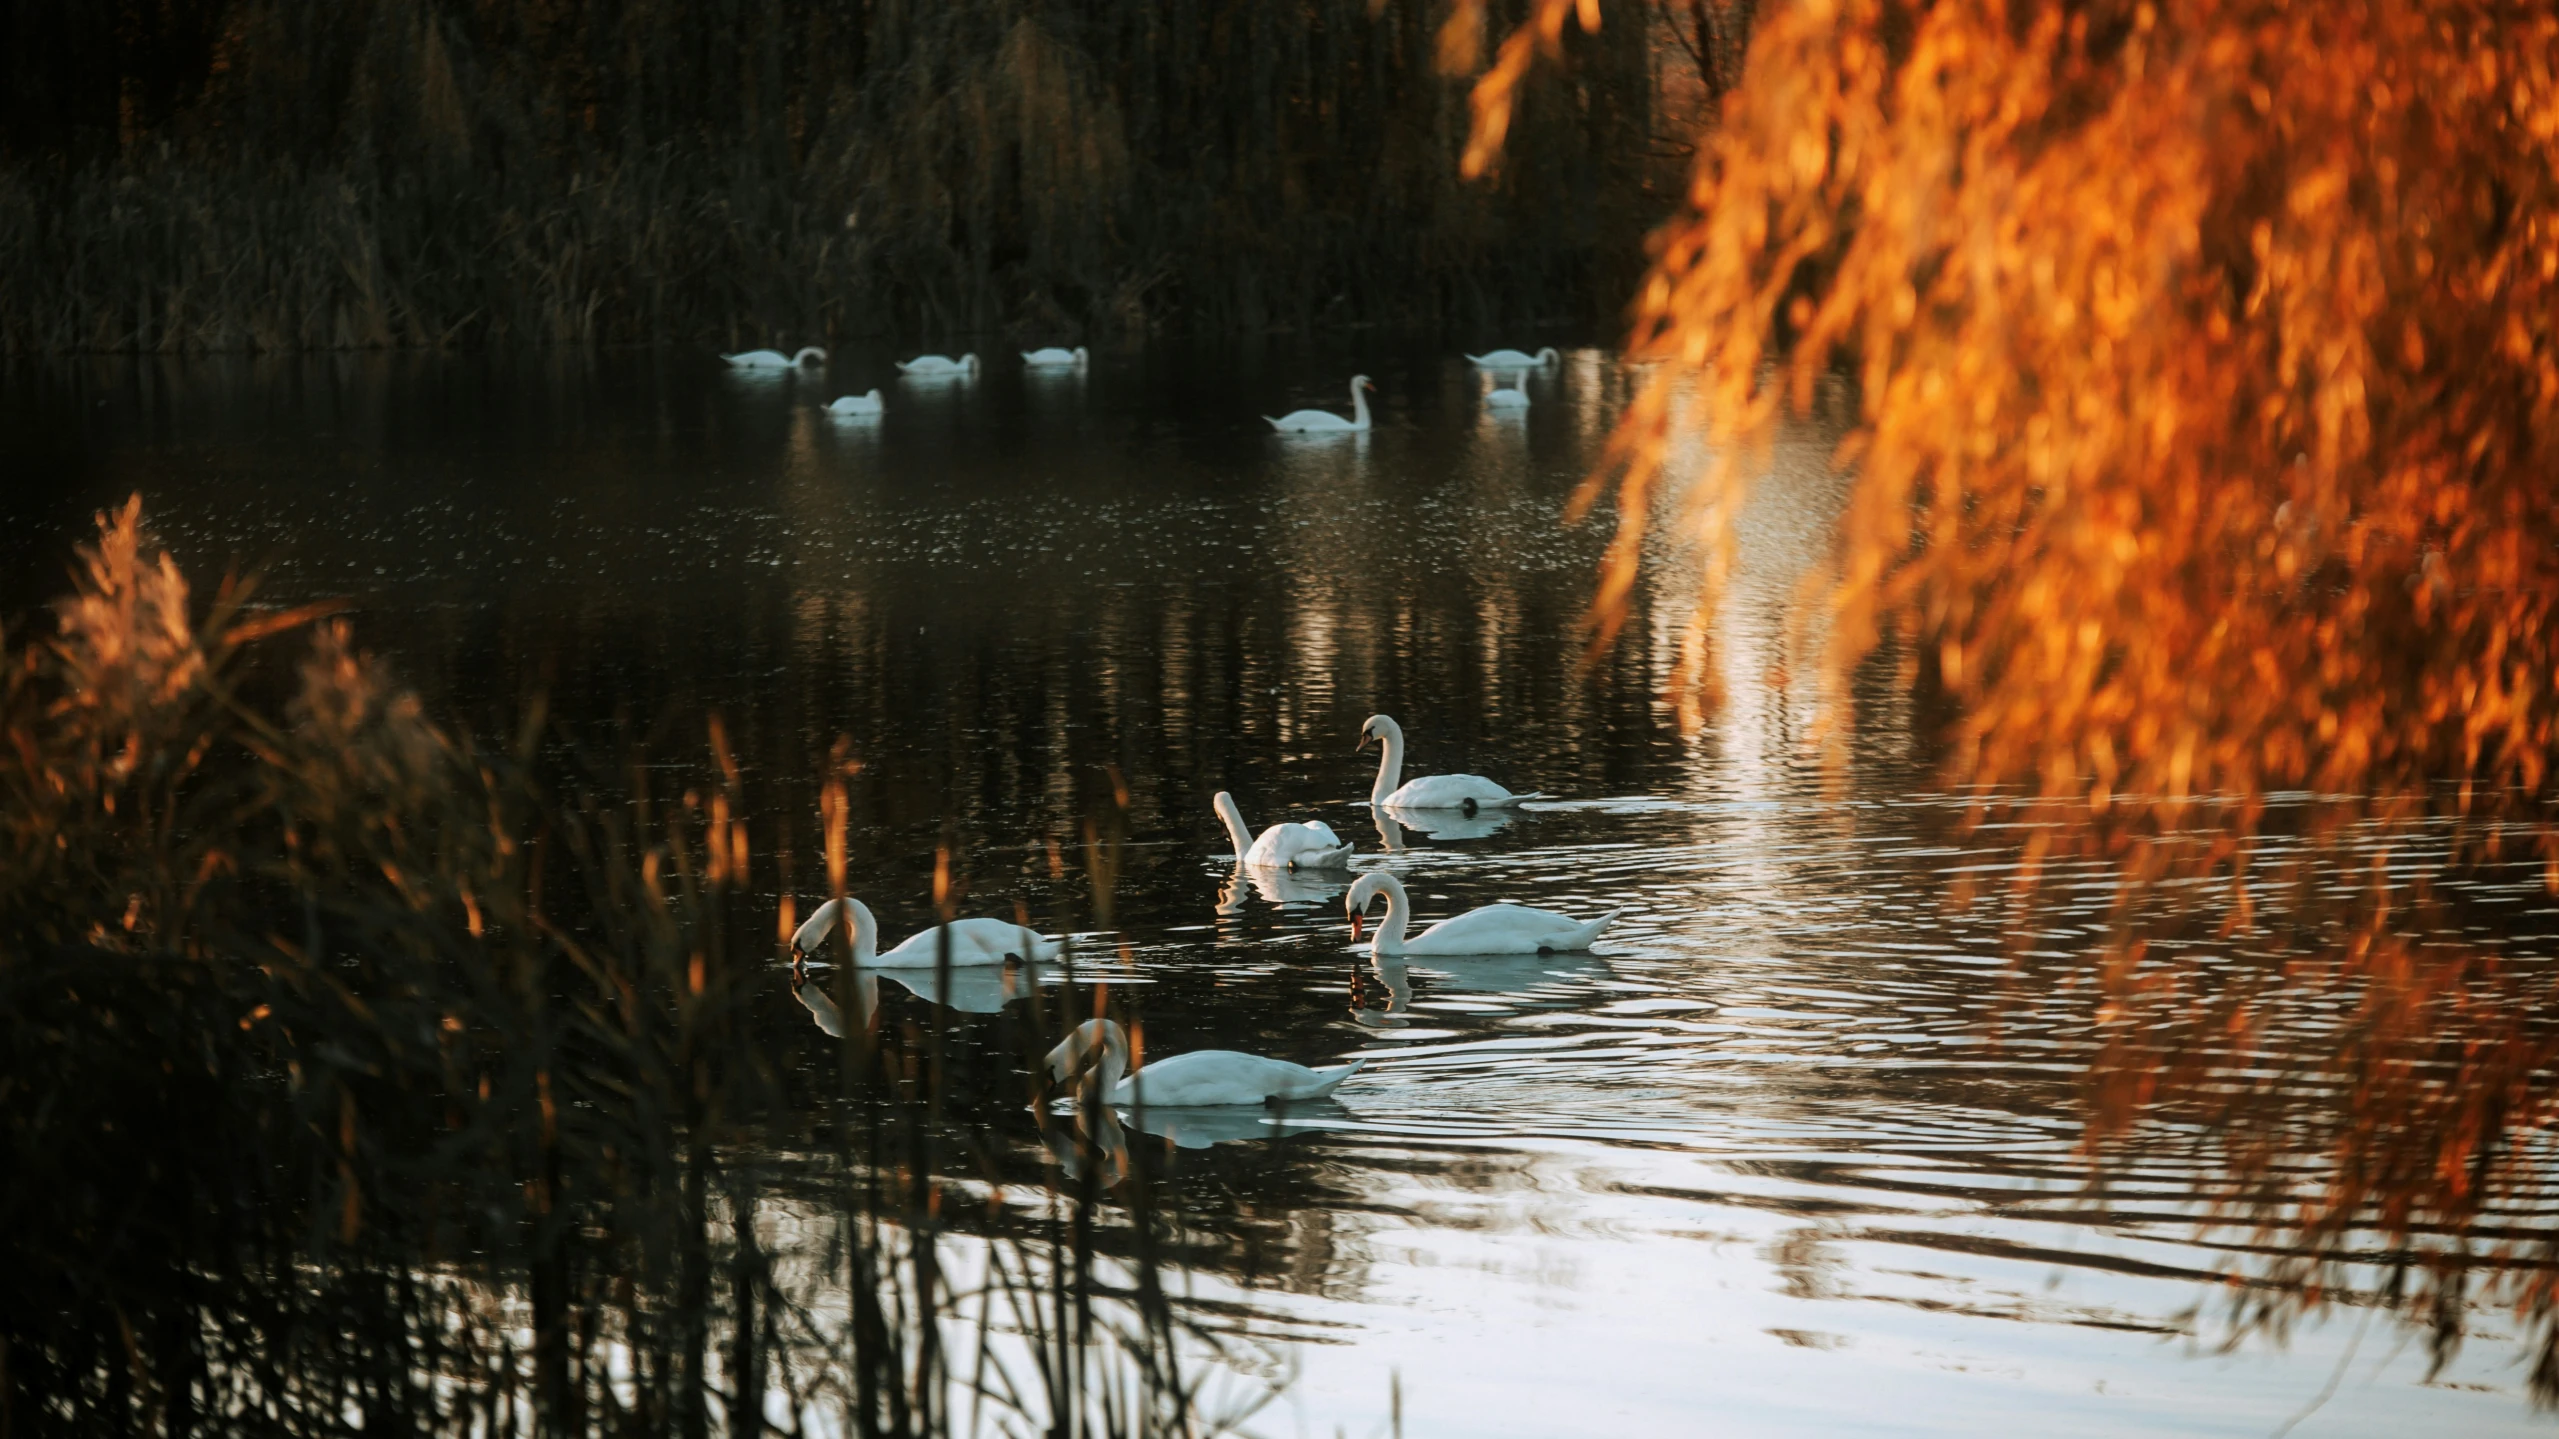 a group of swans swimming in a pond surrounded by trees